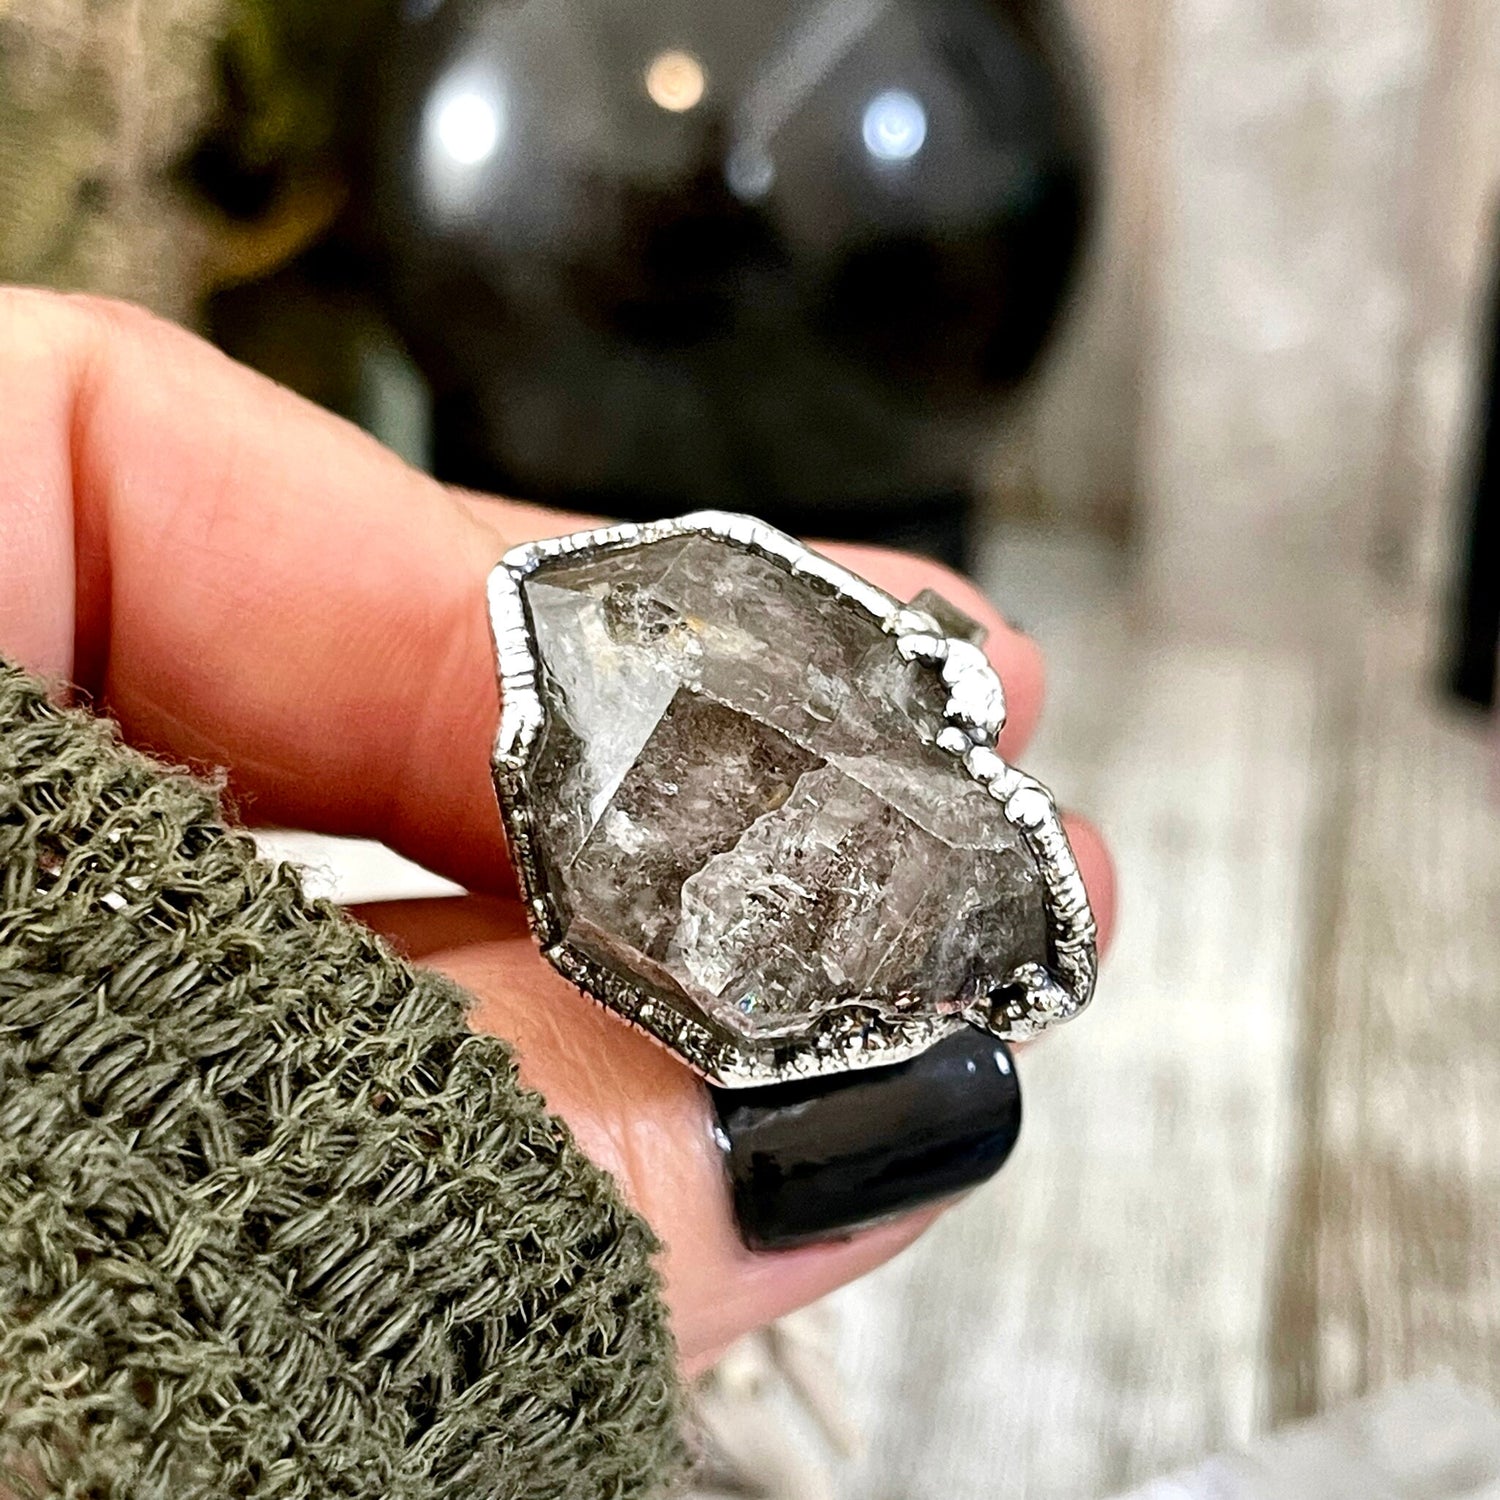 Size 7 Raw Herkimer Diamond Clear Quartz Crystal Cluster Ring Set in Fine Silver / Foxlark Collection - One of a Kind